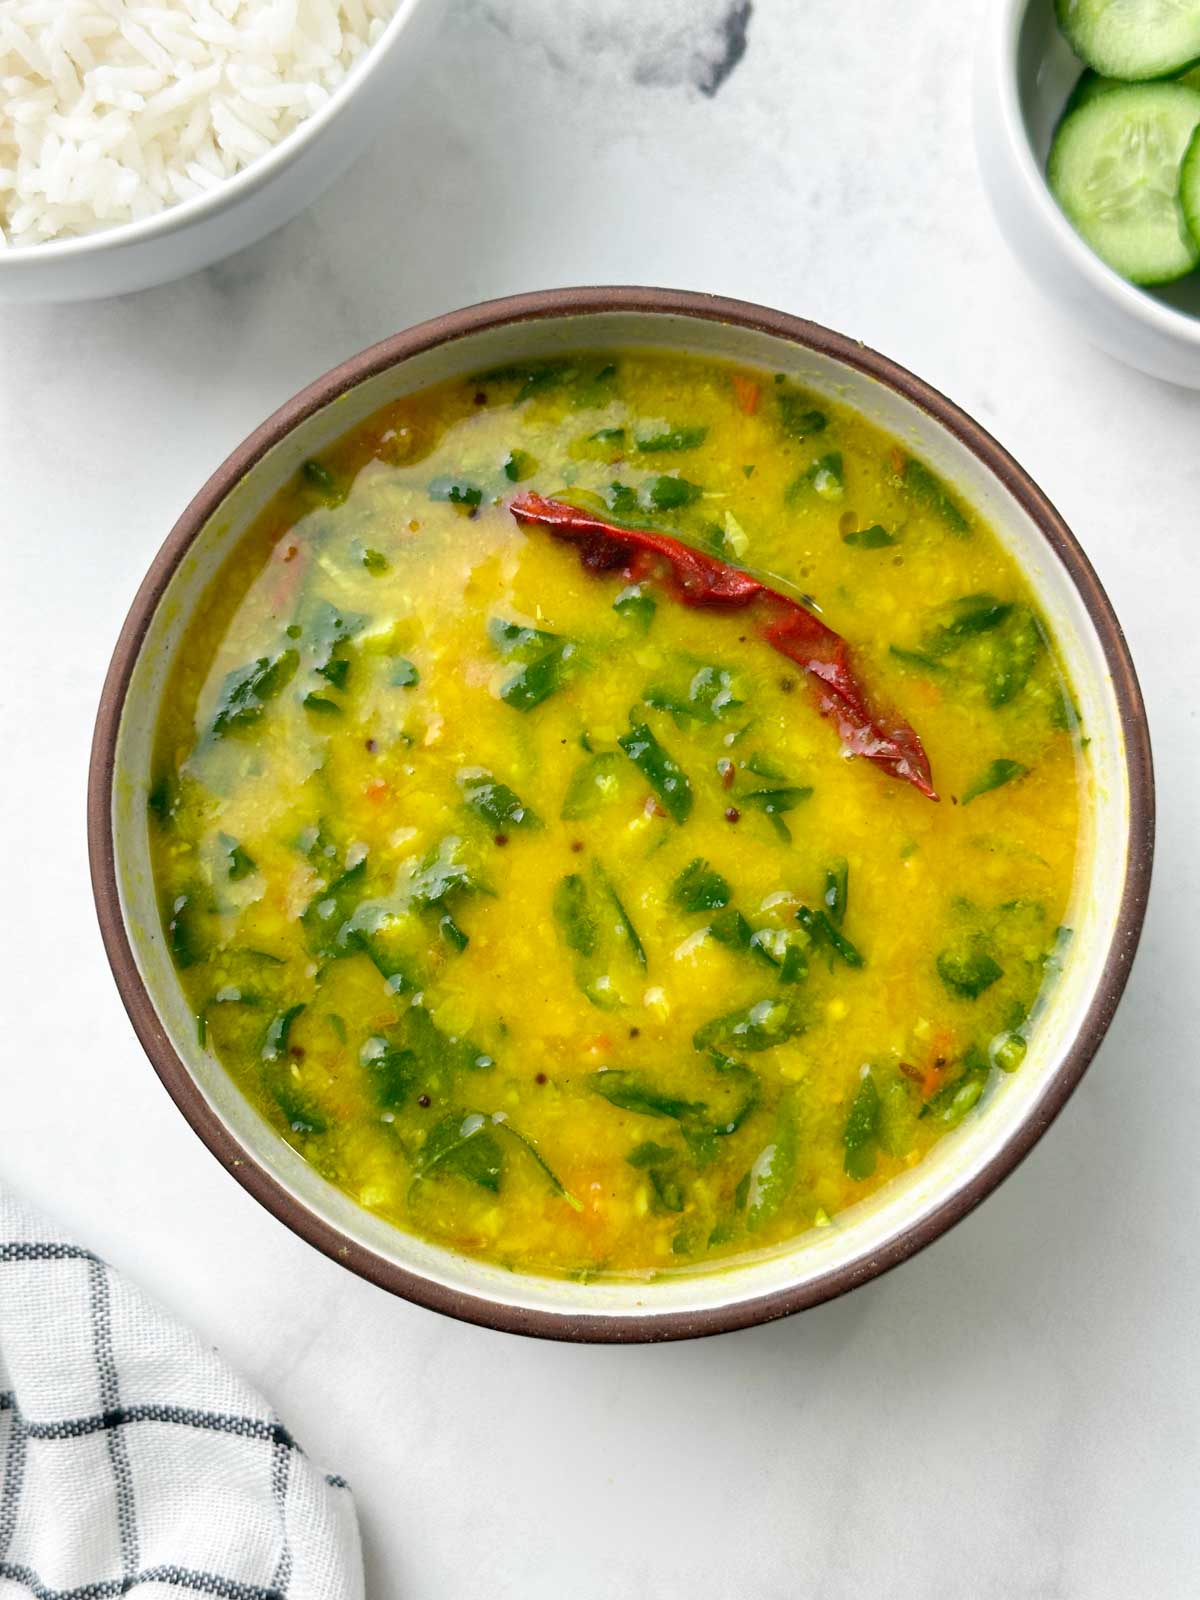 Dal methi served in a bowl with rice and cucumber salad on the side